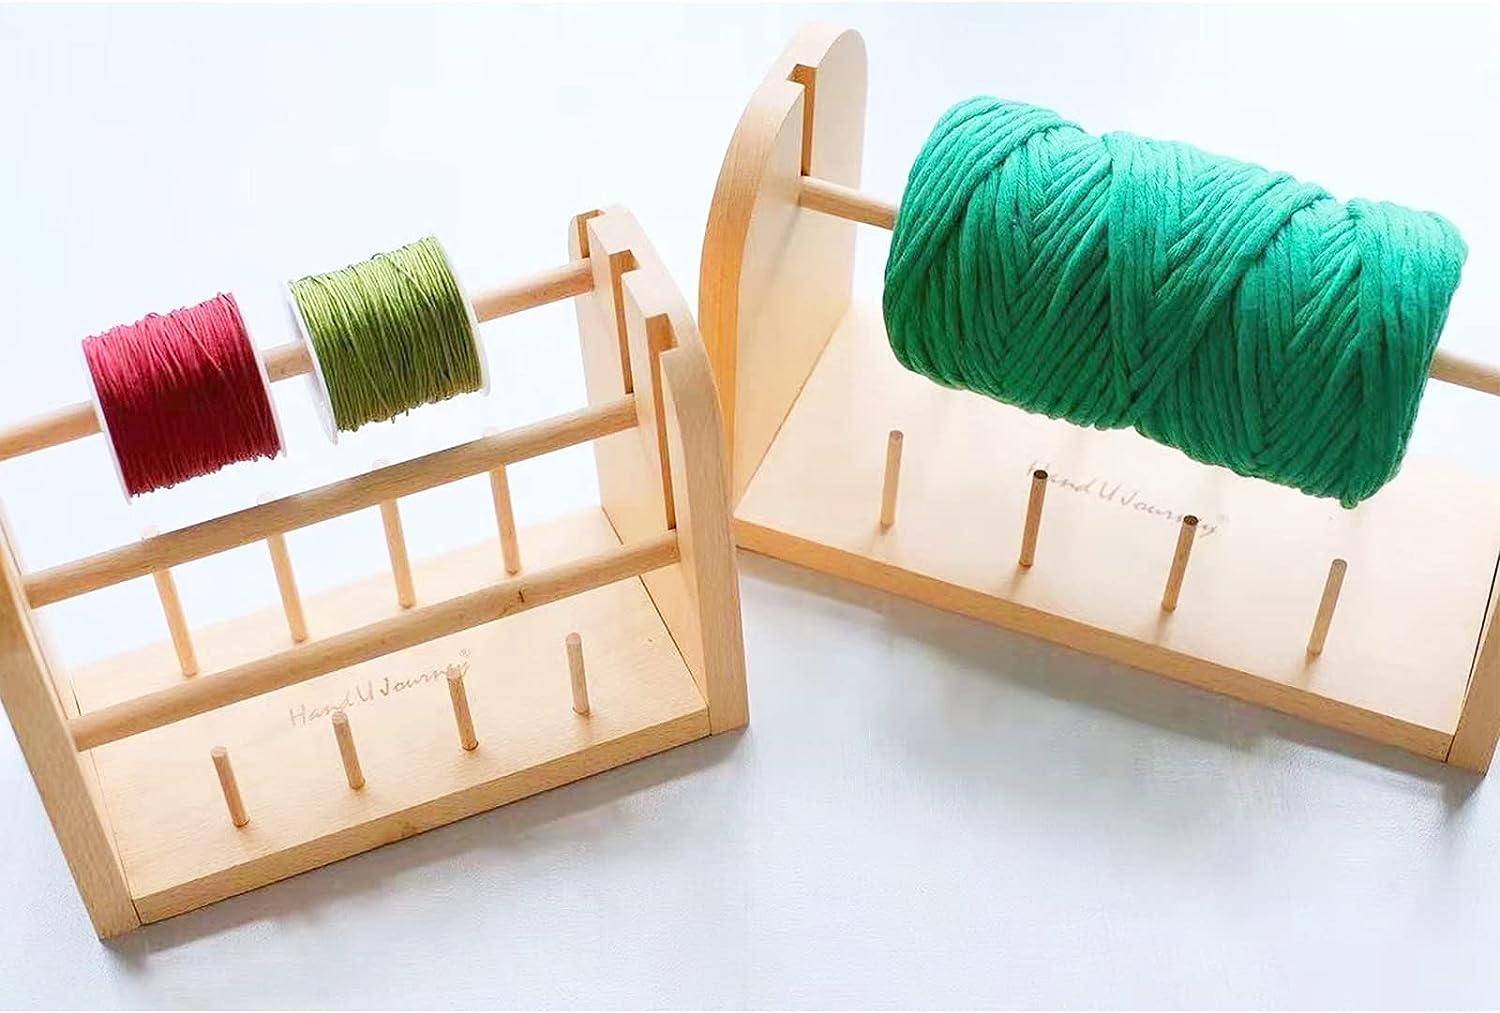 Yarn Holder Wool Yarn Spindles, 3 Spools + 8 Spools Wooden Thread Holder for Embroidery Quilting Sewing, Multifunctional Beech Thread Rack Organizer